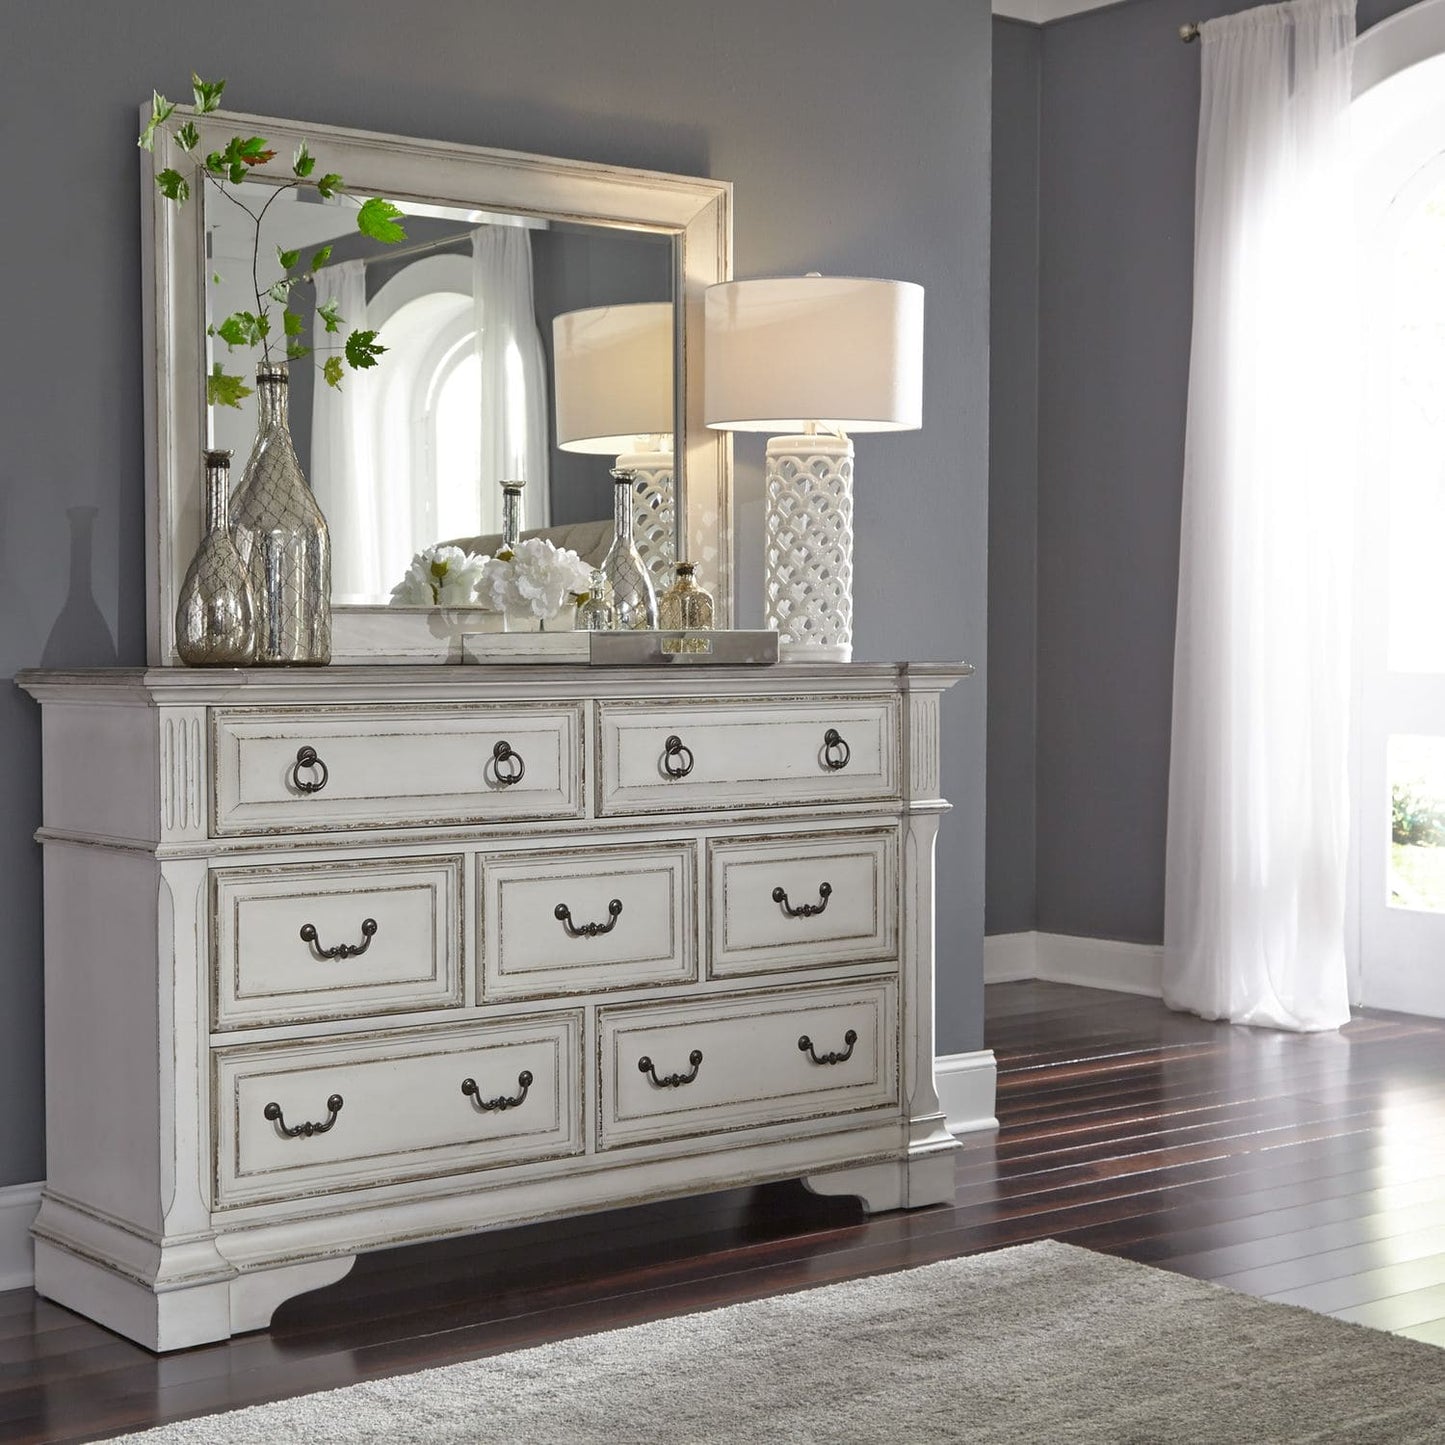 Abbey Park - King California Panel Bed, Dresser & Mirror, Chest, Night Stand